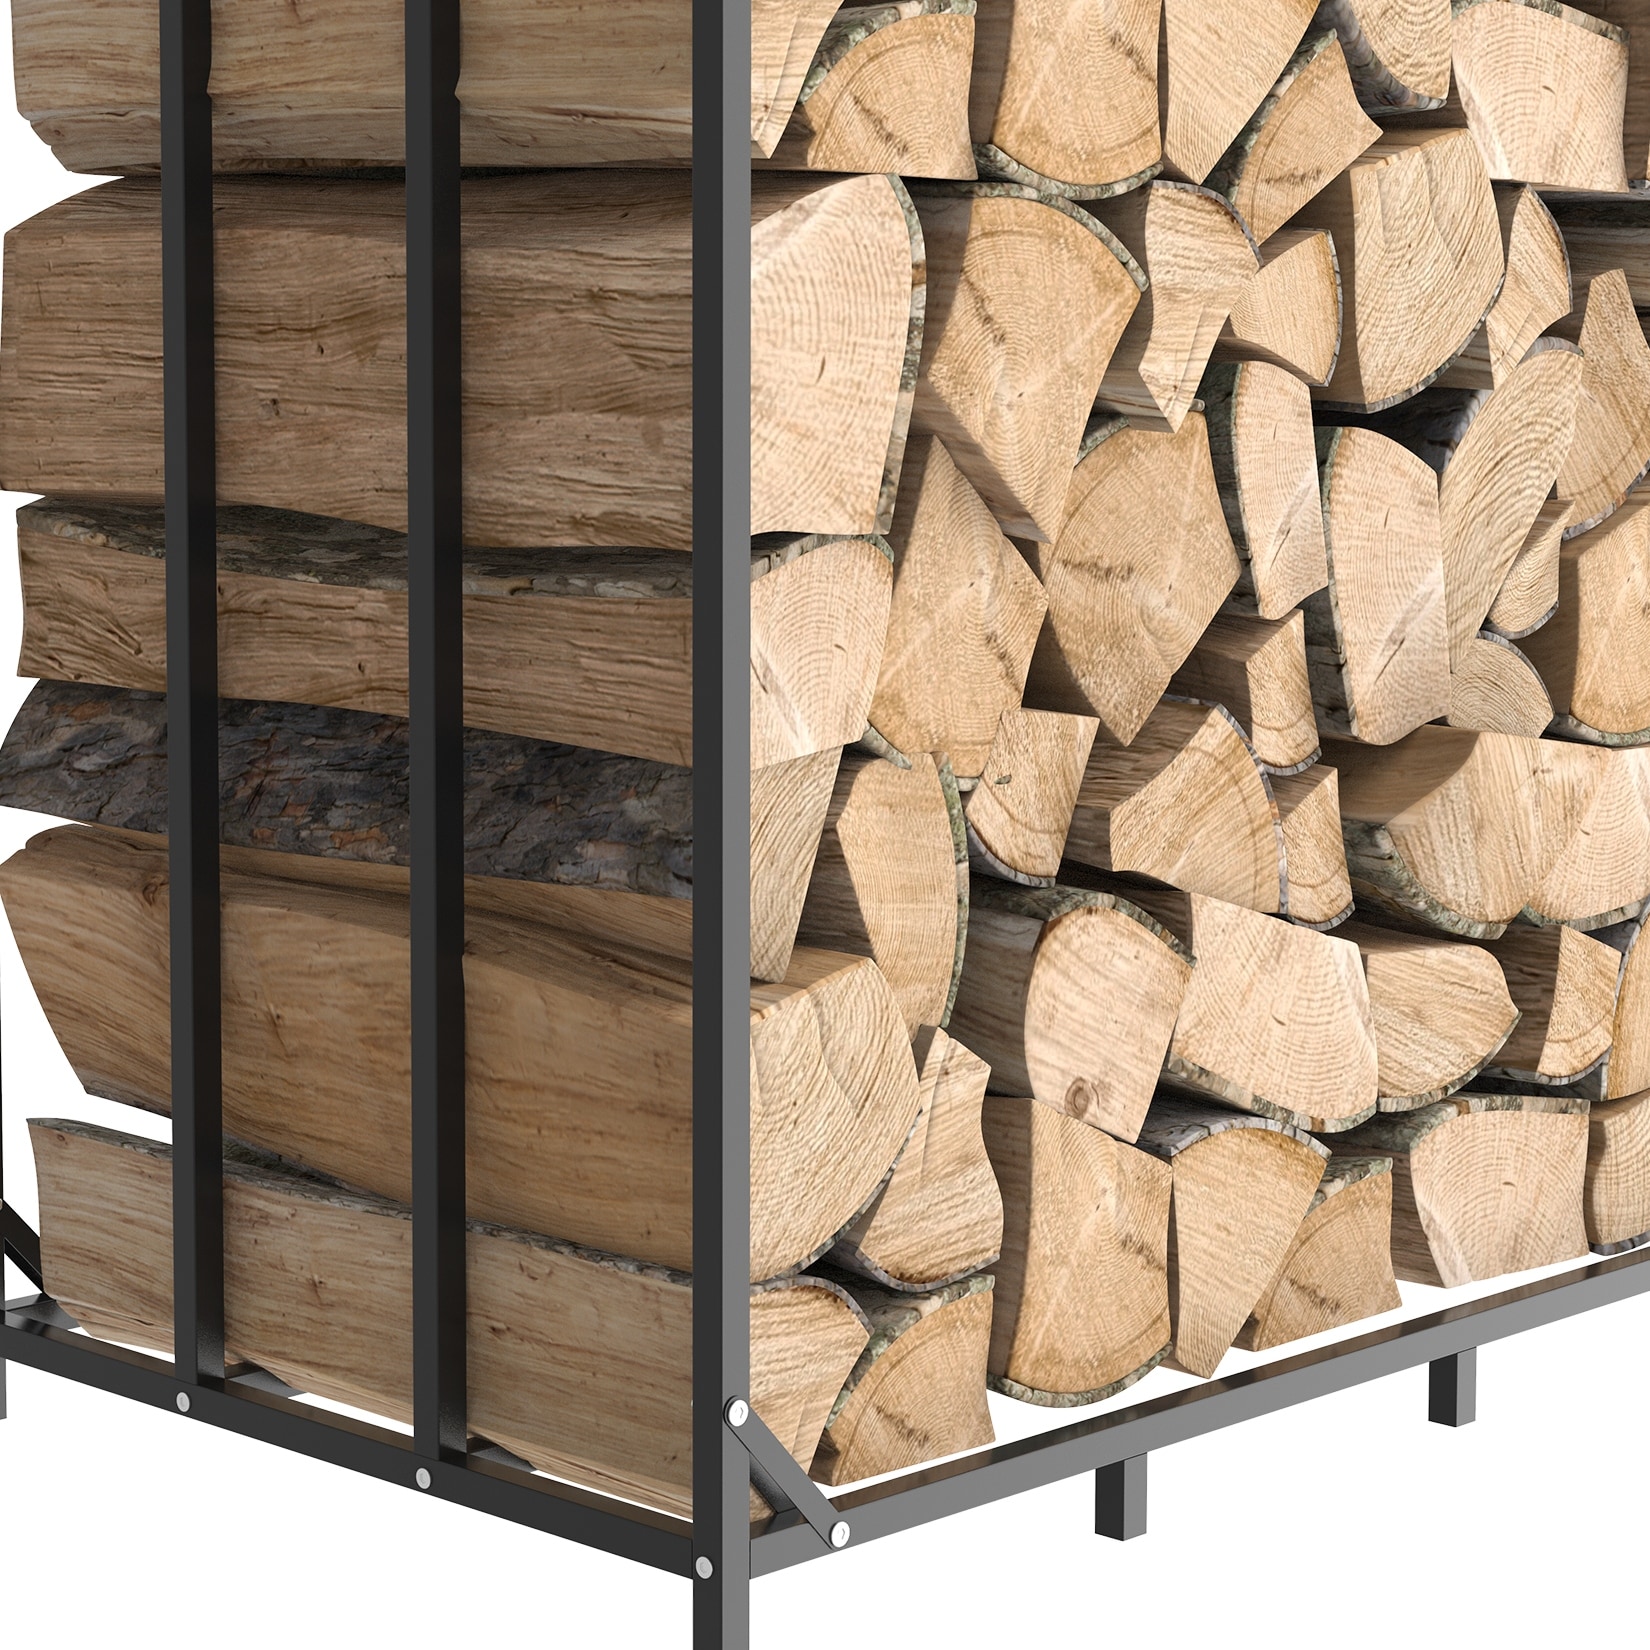 Jumbo 70x62in Outdoor Firewood Rack Log Holder Storage Shed with Waterproof  Roof